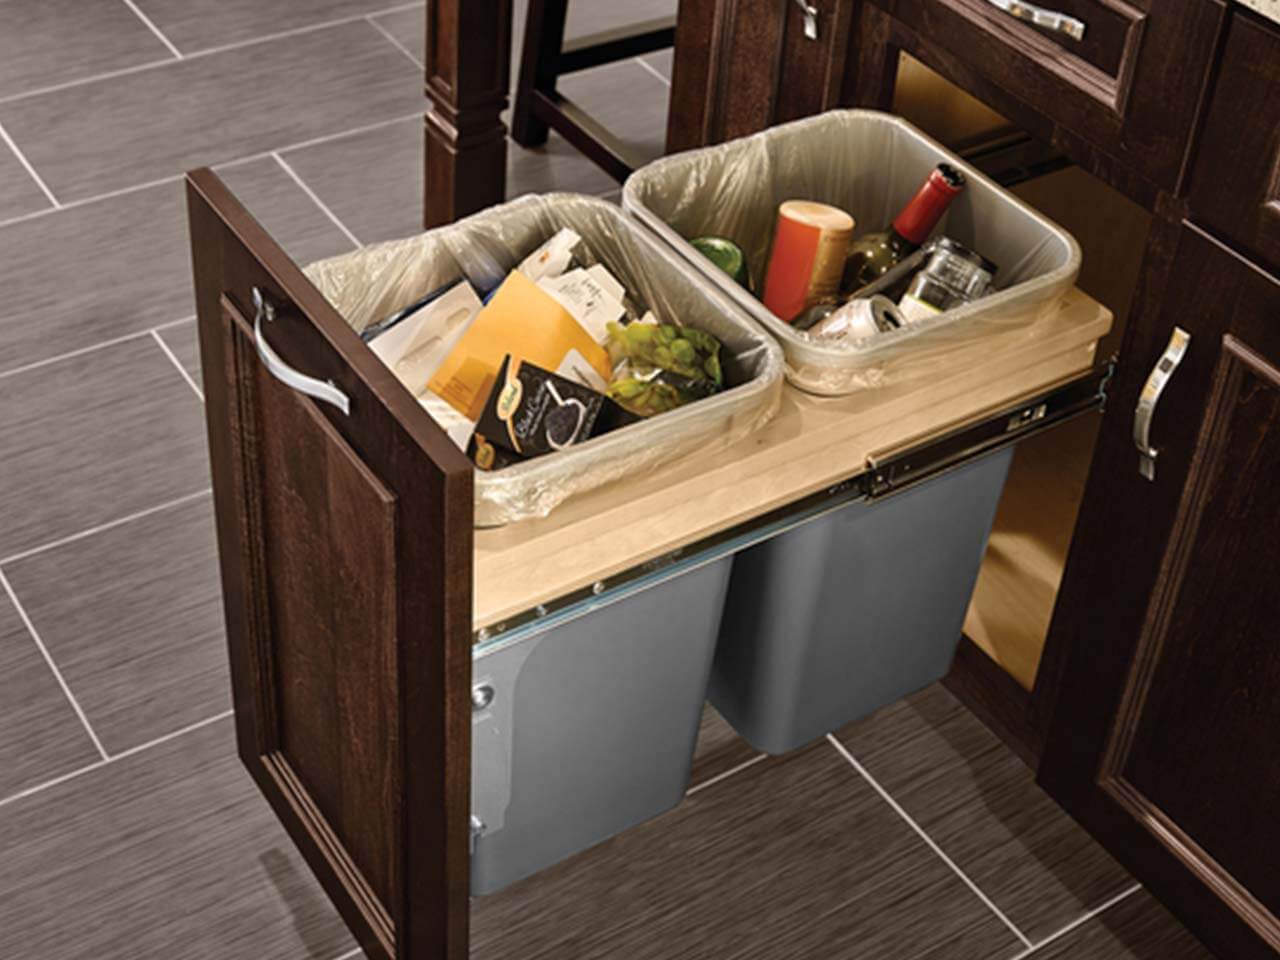 kitchen cabinet built in storage options for trash cans